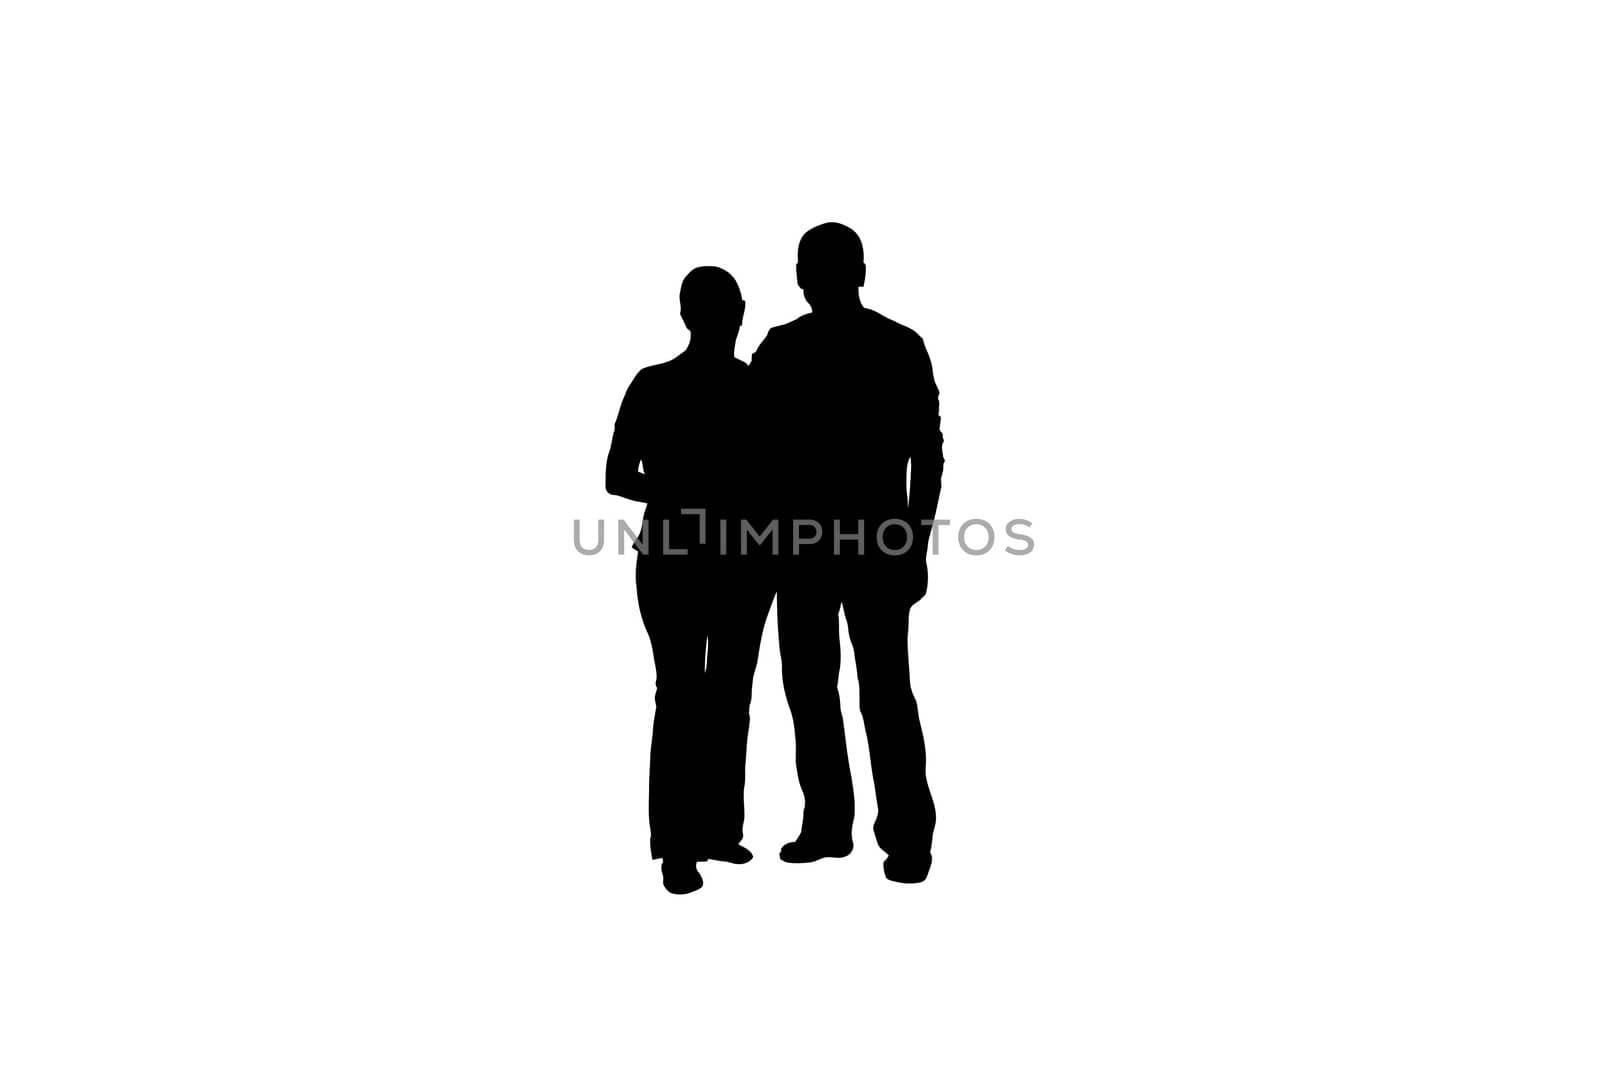 Silhouettes of men and women standing together.